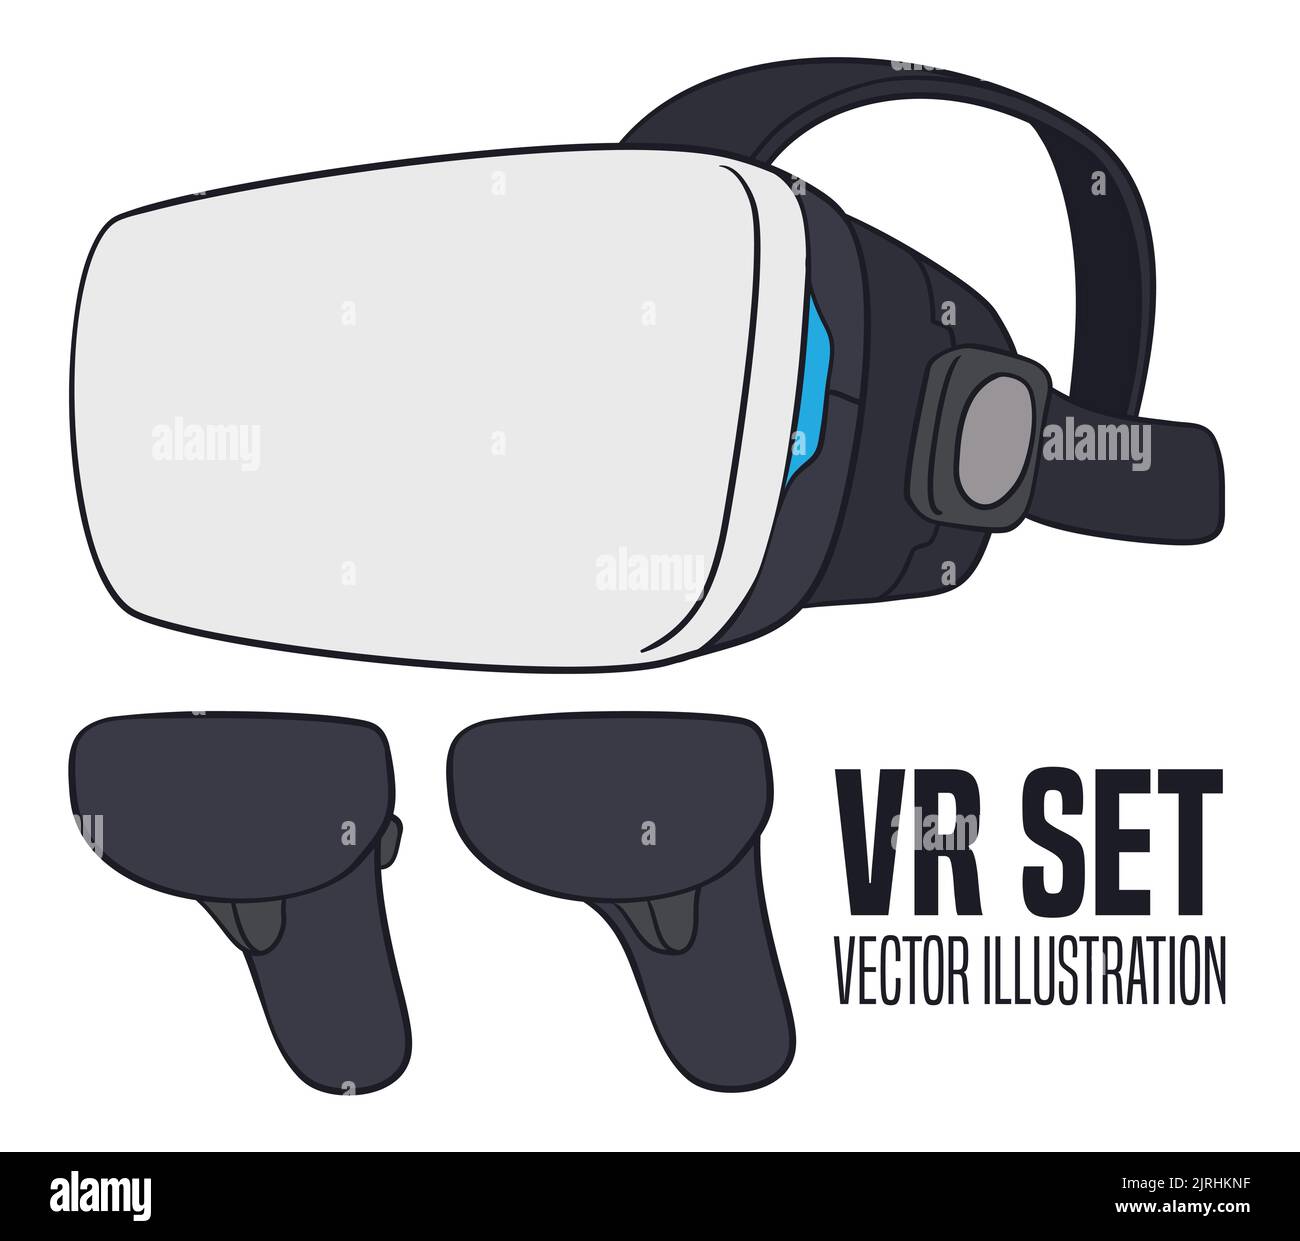 Design in flat style of a virtual reality headset, with controllers ready to enjoy the metaverse. Stock Vector